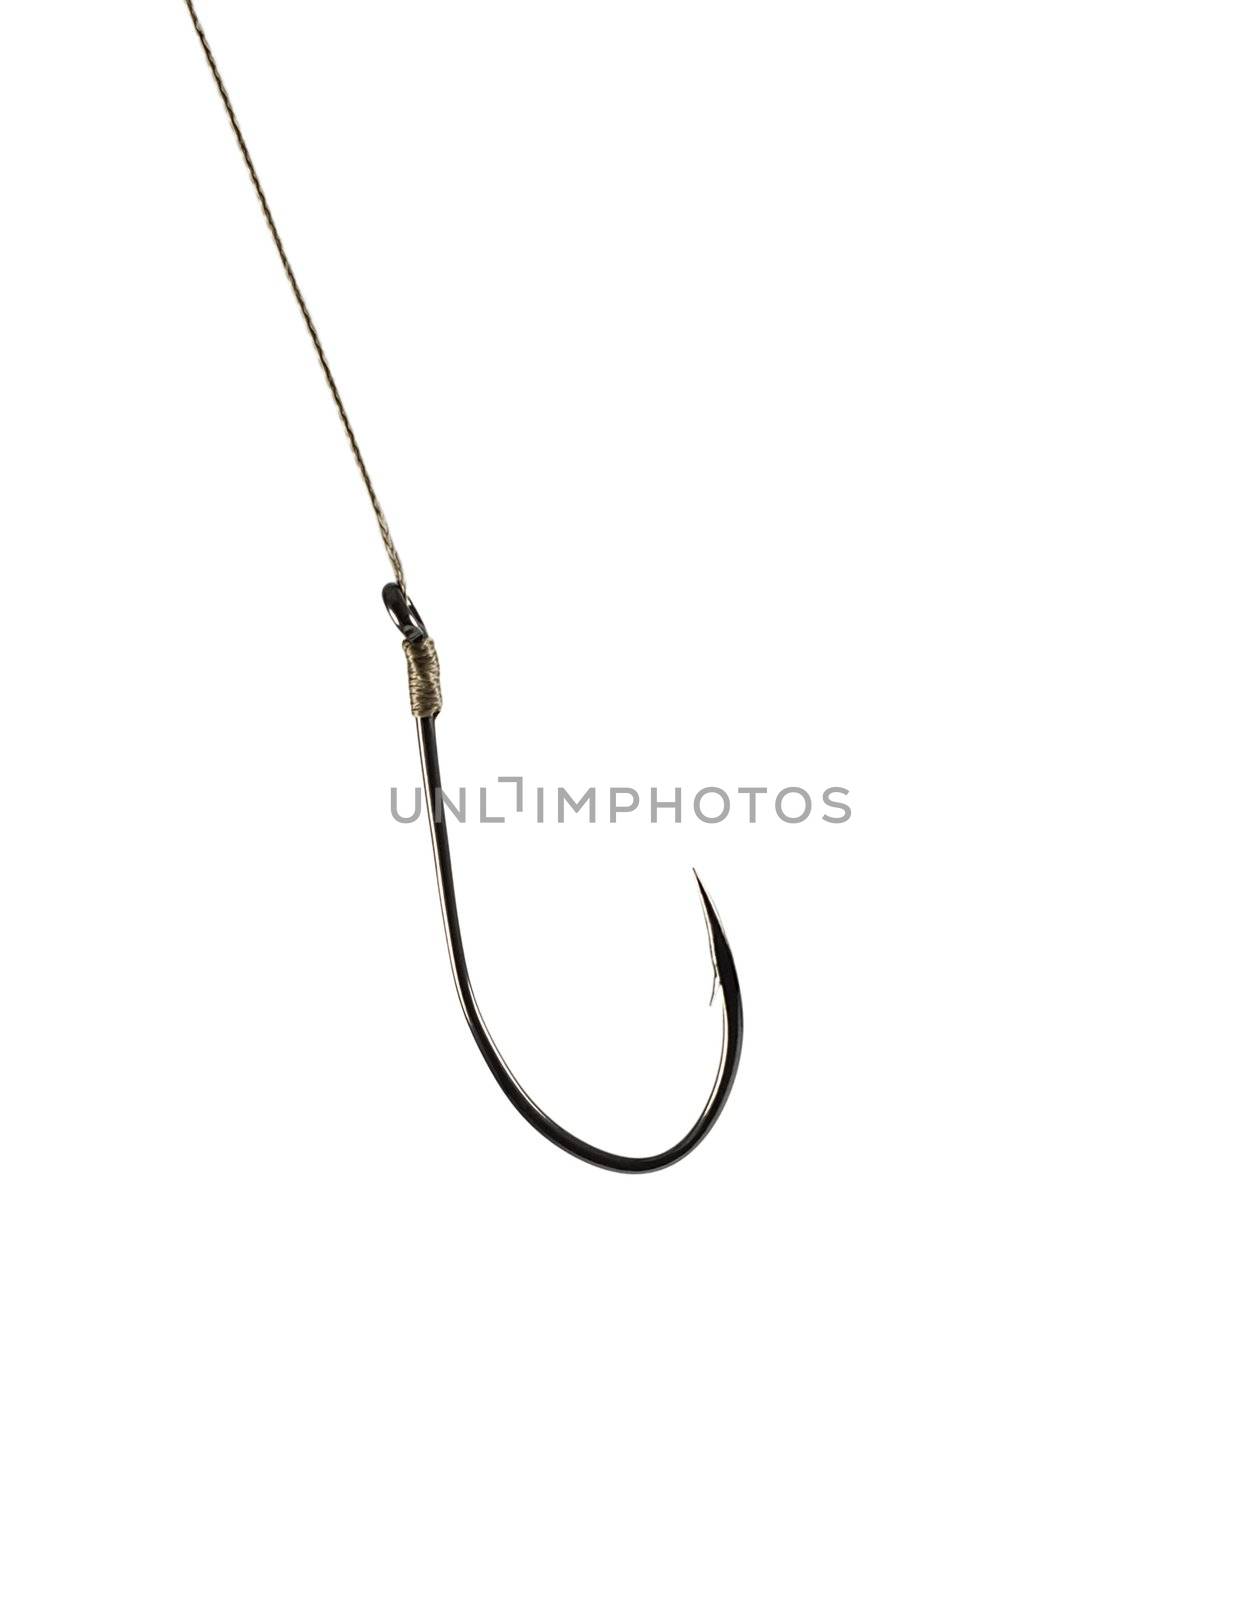 Stainless steel fishing hook isolated on white